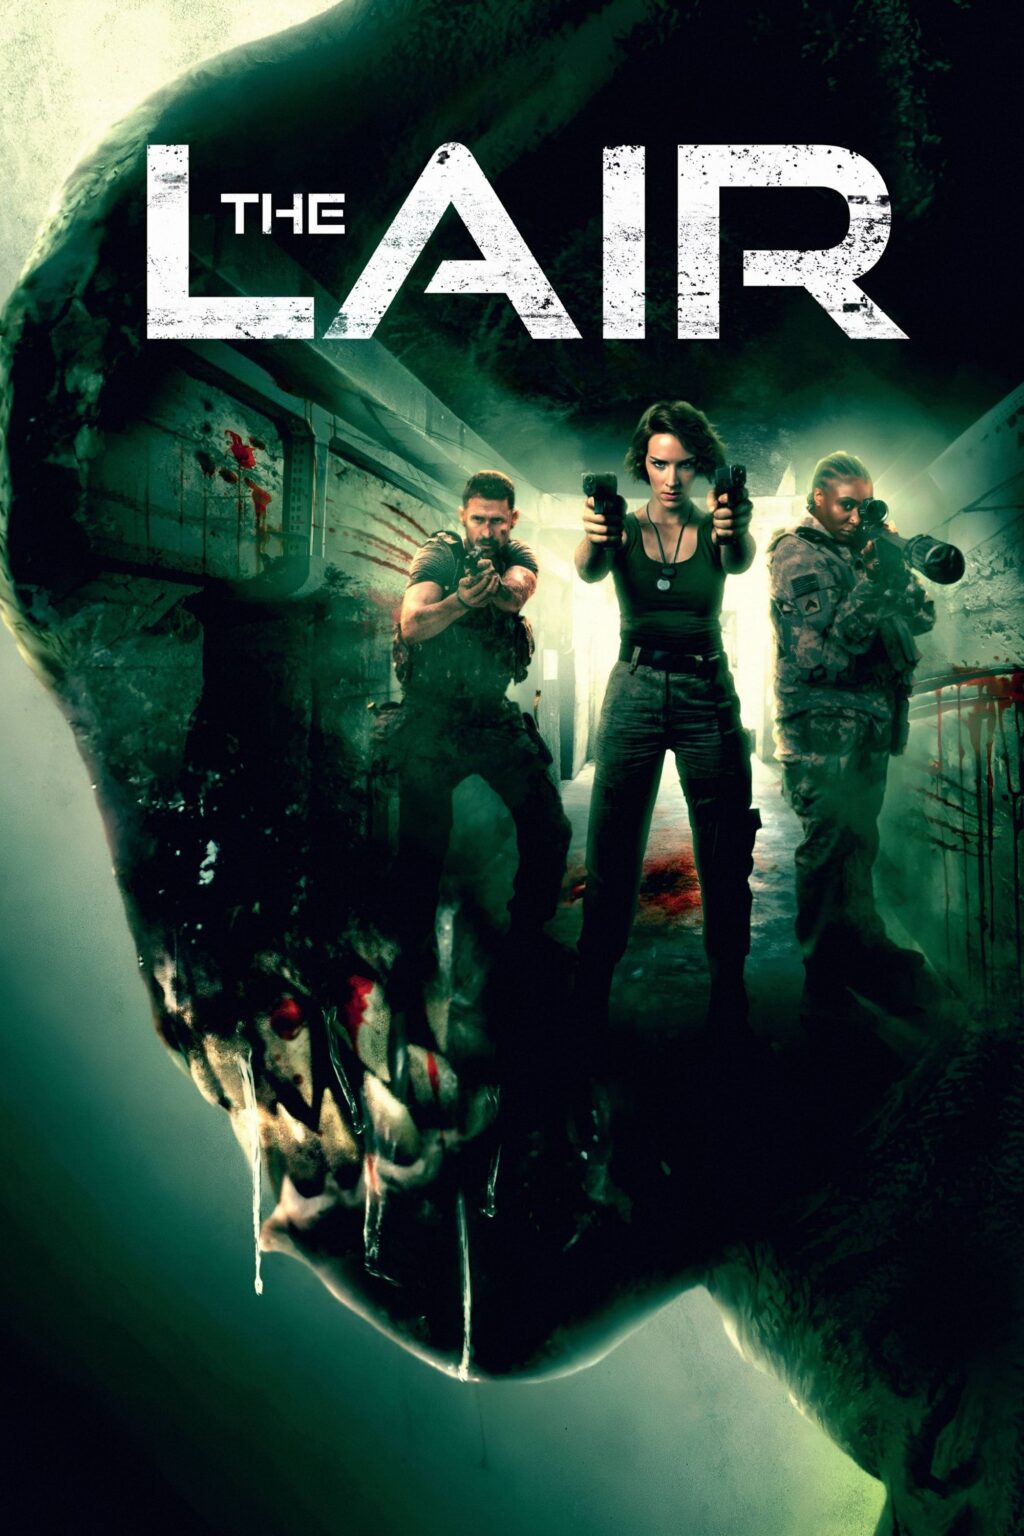 Poster for the movie "The Lair"